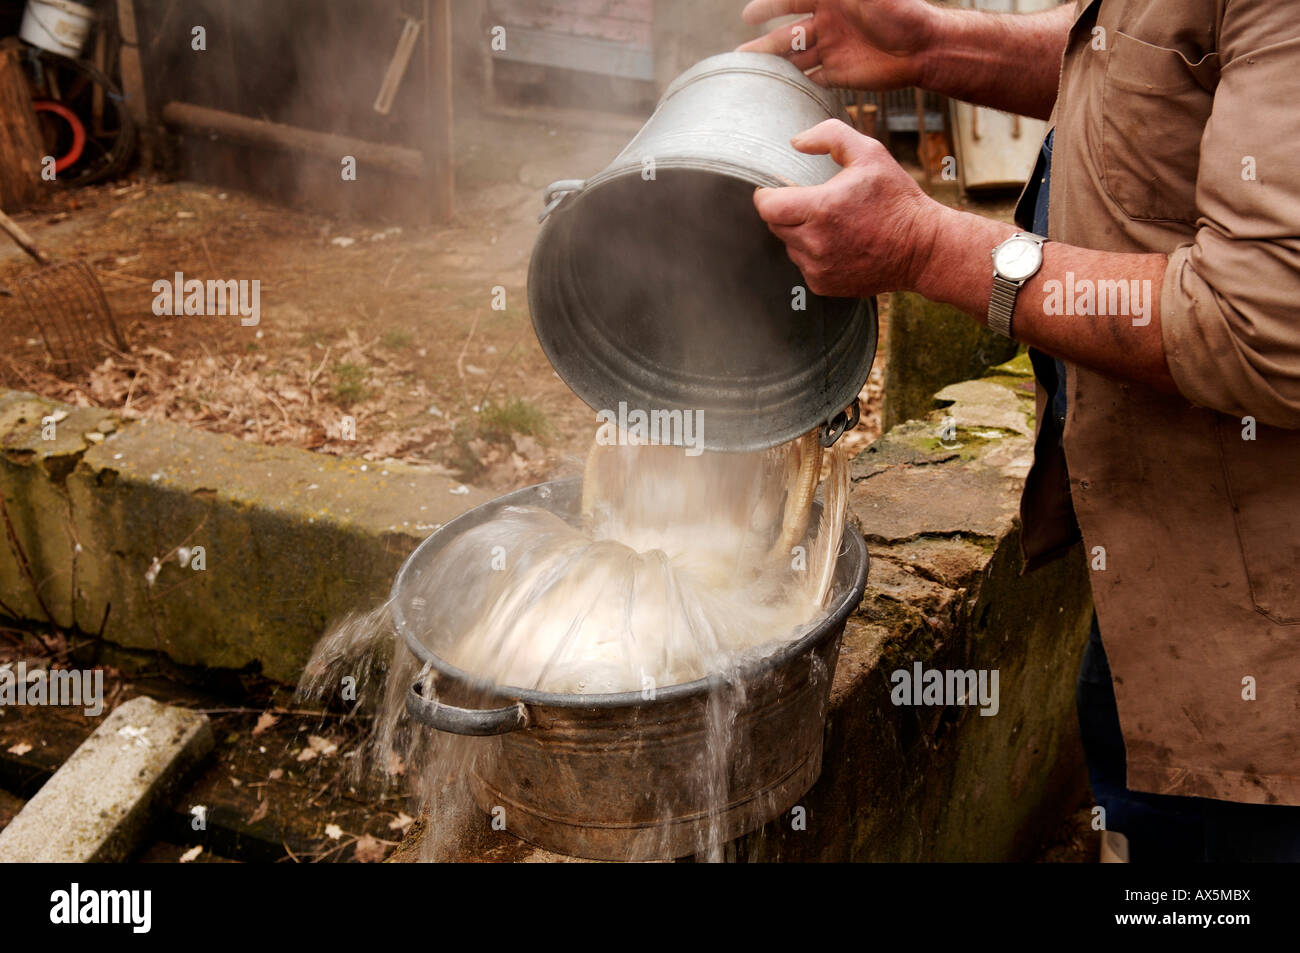 Home slaughtering (duck), farmer pouring boilding water over the duck, Eckental, Middle Franconia, Bavaria, Germany, Europe Stock Photo